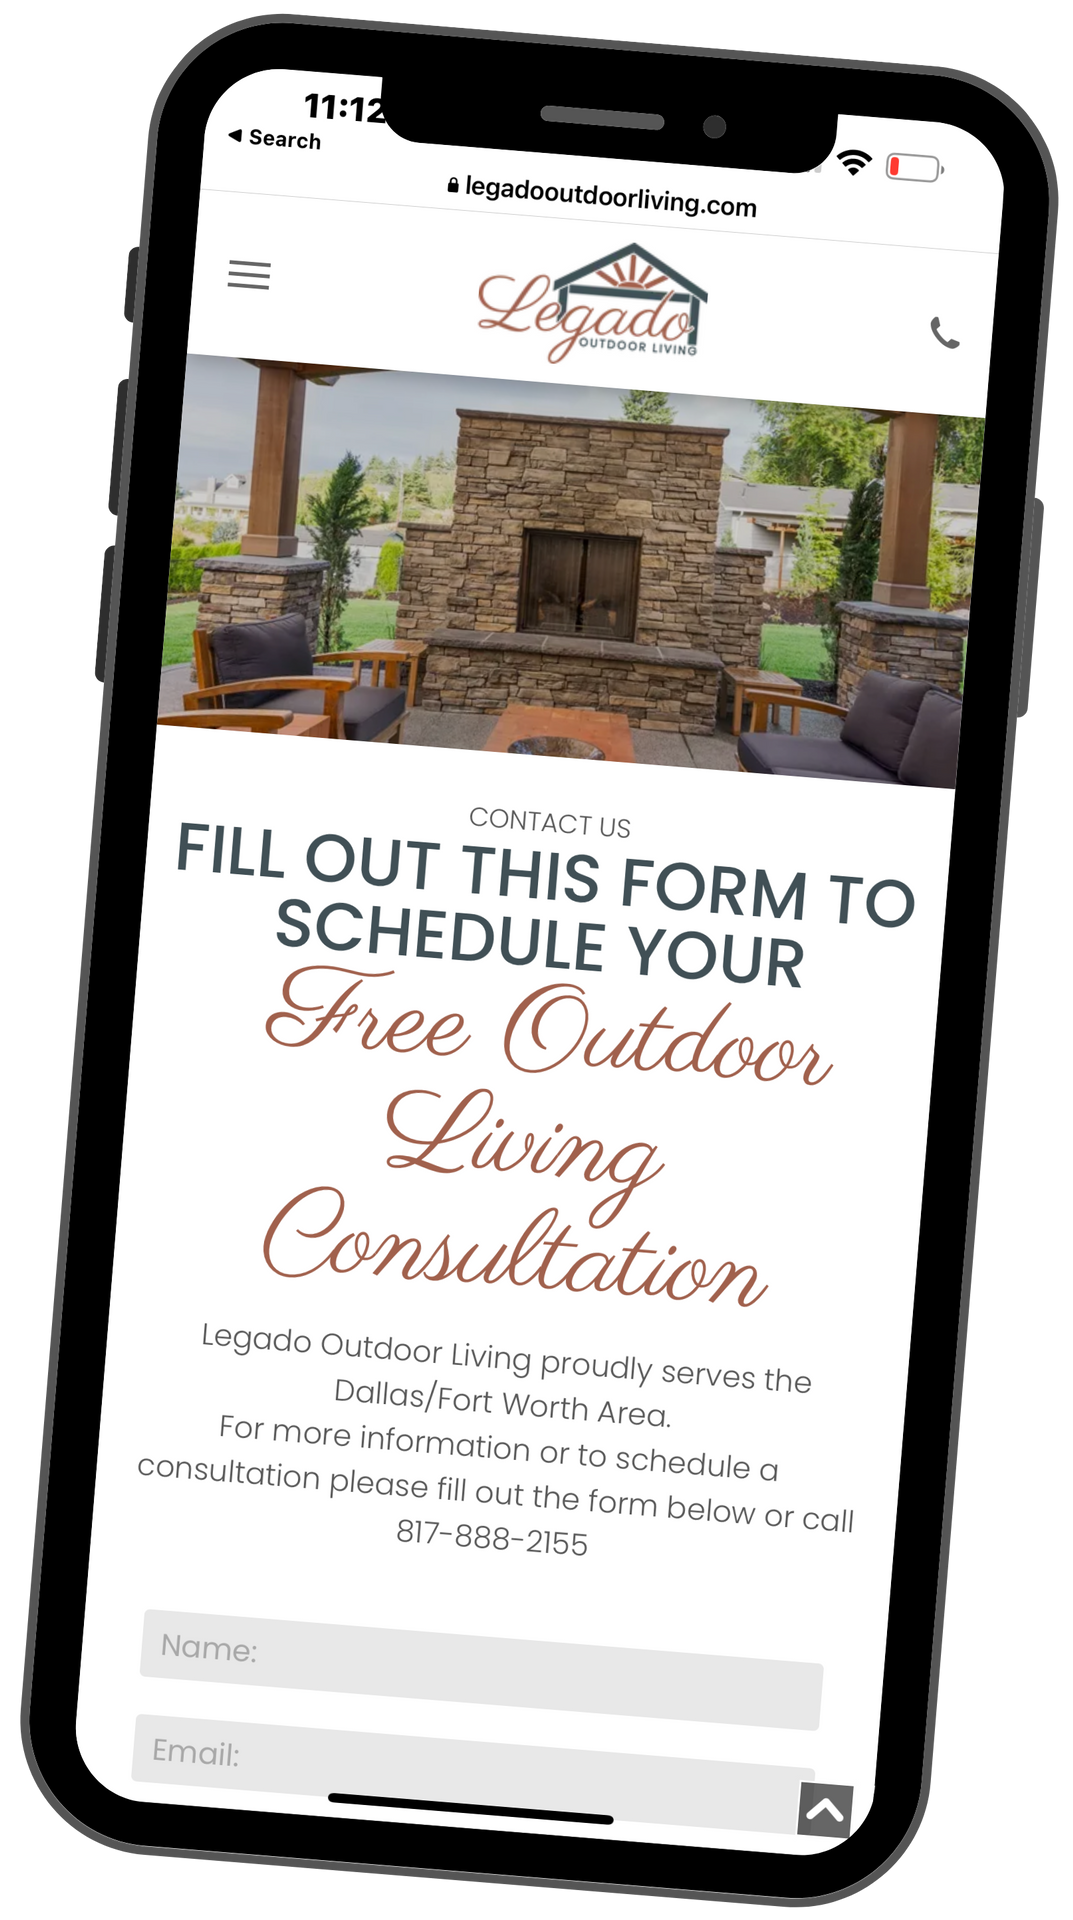 A cell phone is displaying a website that says `` fill out this form to schedule your free outdoor living consultation ''.